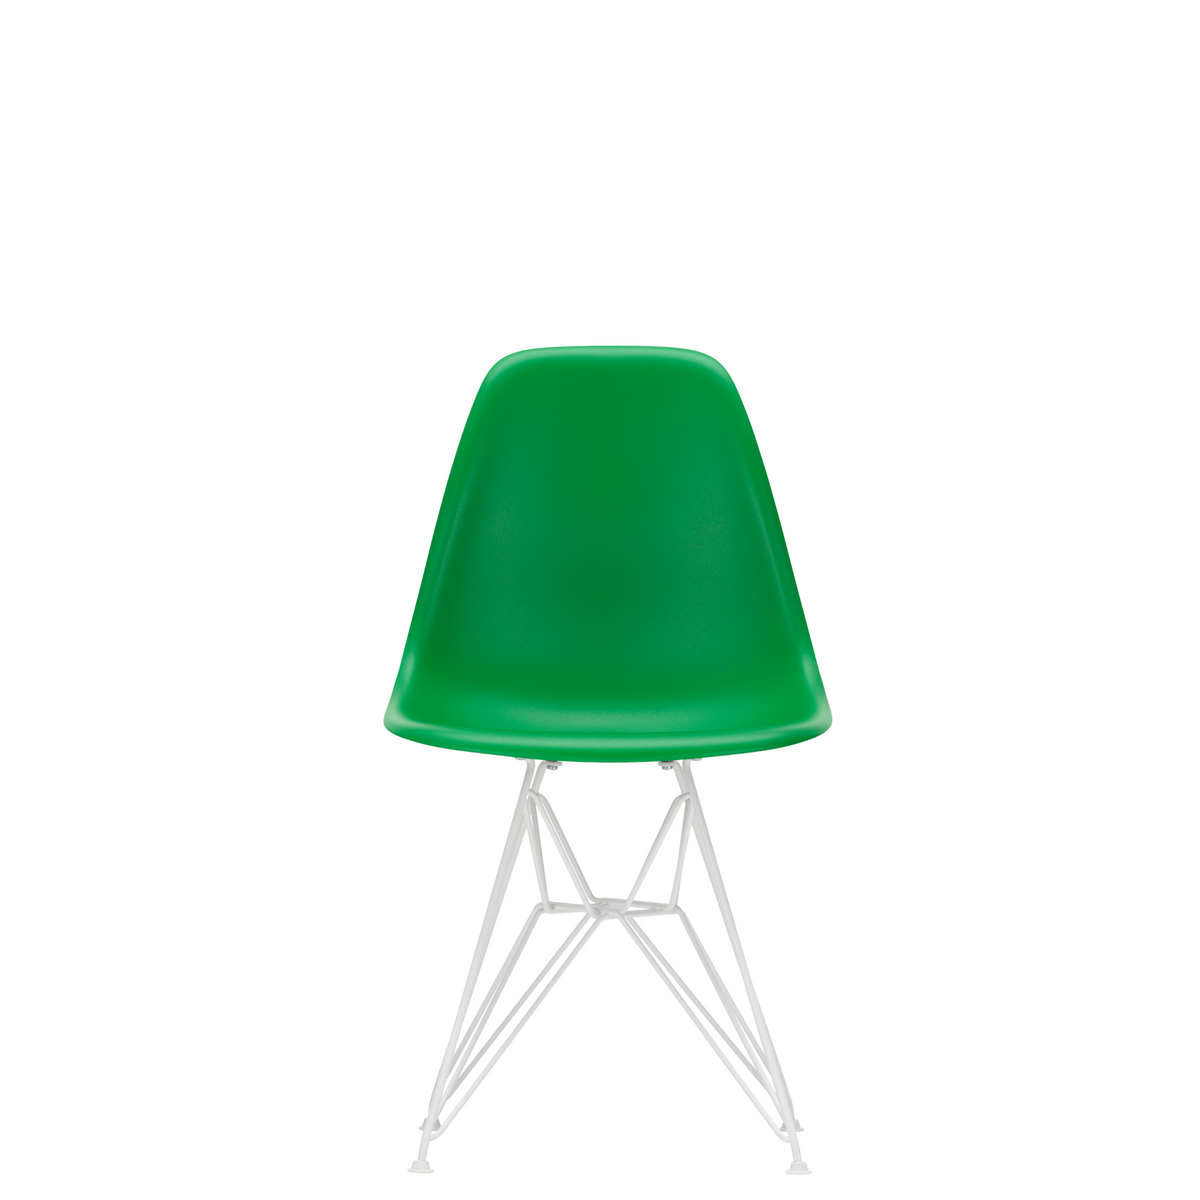 Vitra Eames Plastic Side Chair DSR Powder Coated for Outdoor Use. Green Shell, White Powdercoated Base